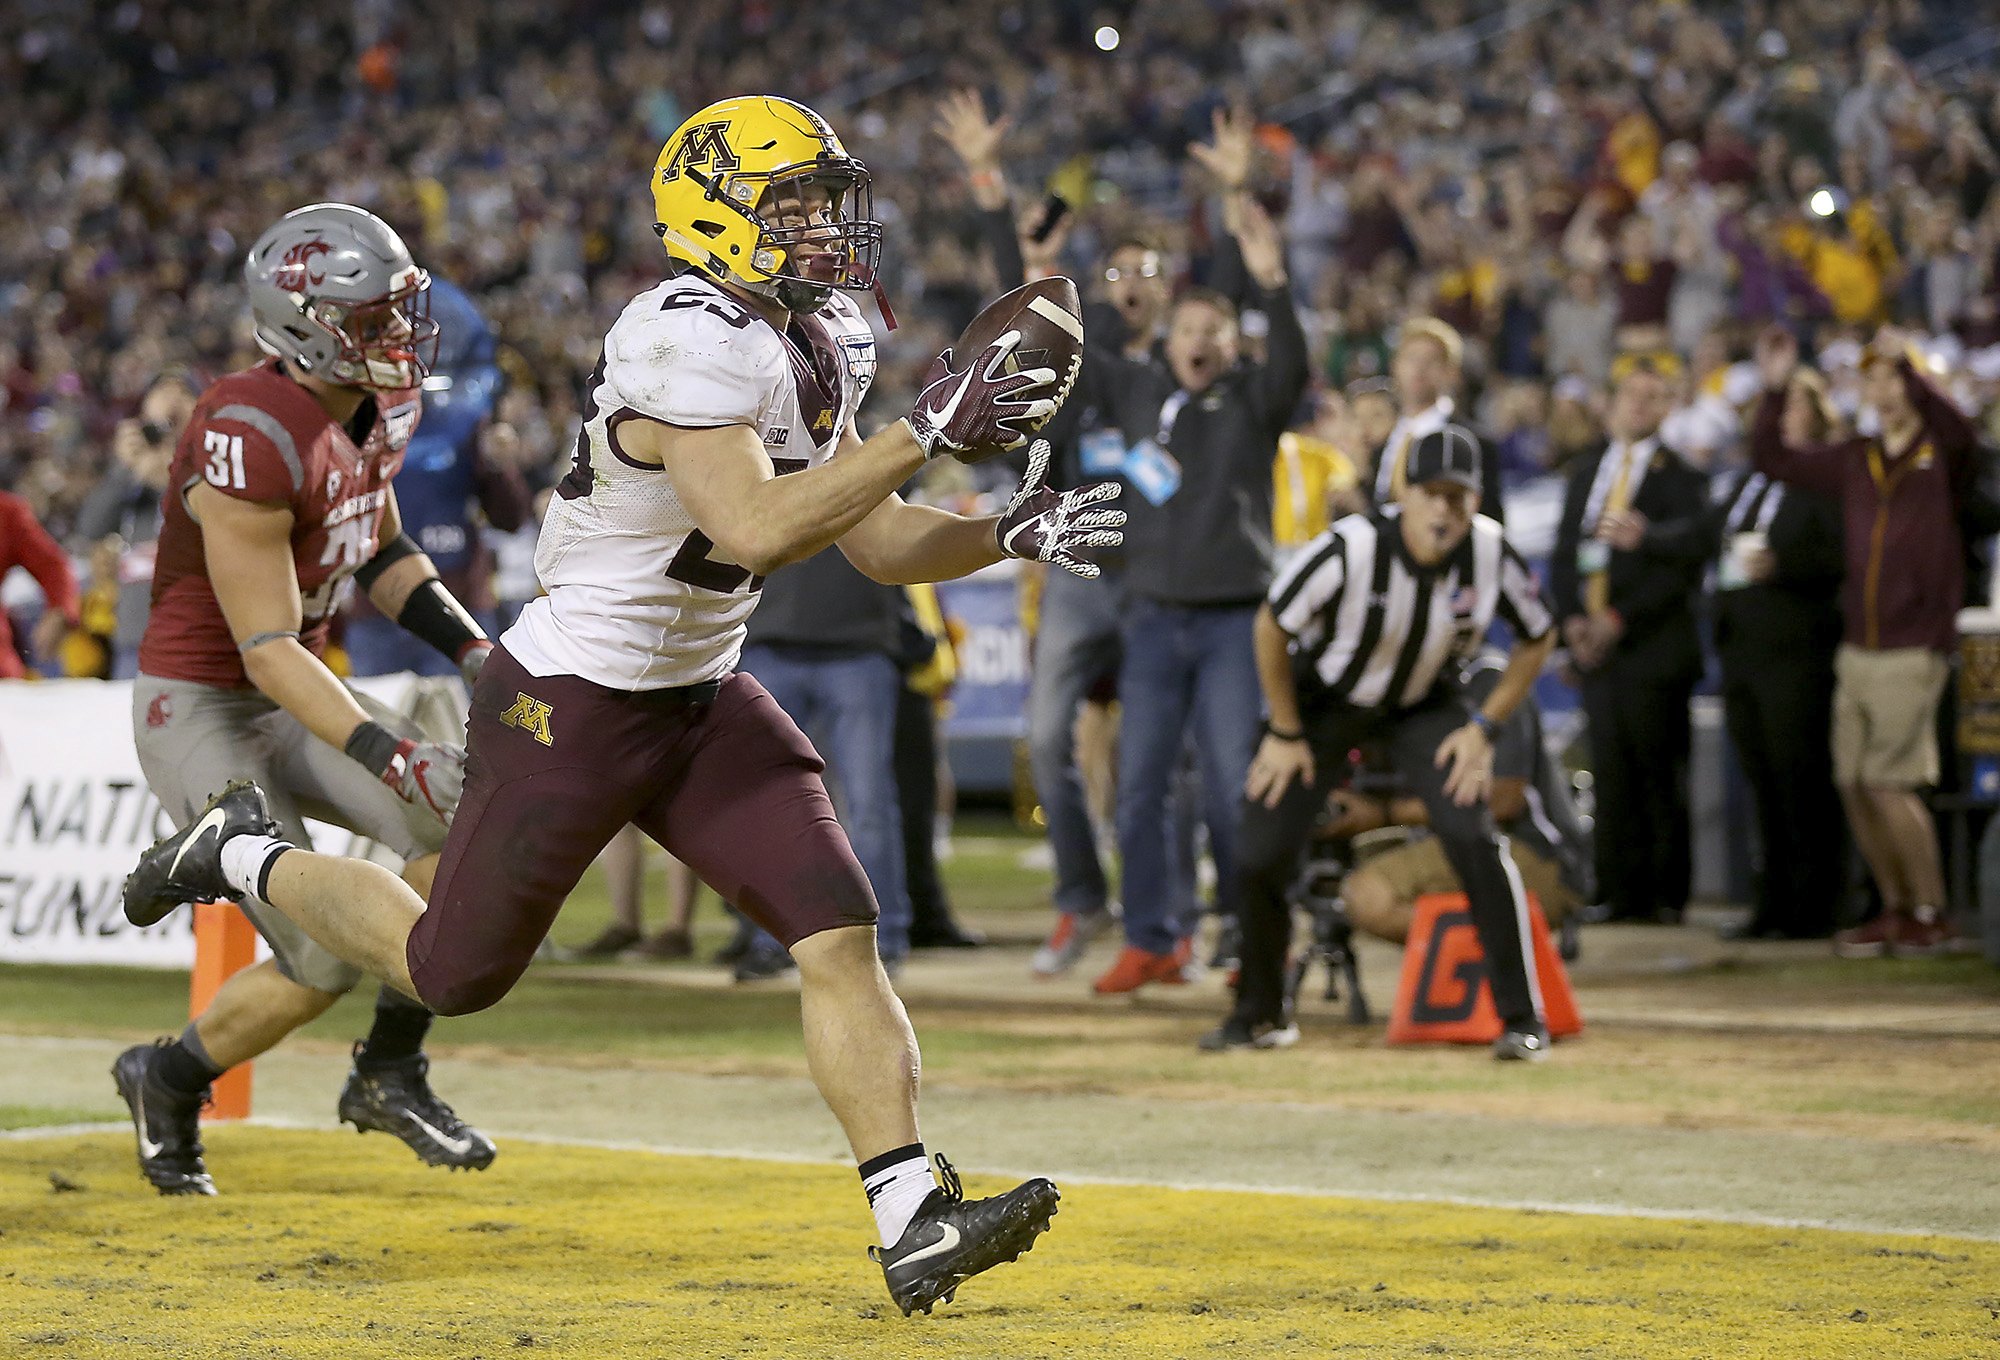 WSU offense falls flat in 17-12 loss to Minnesota in Holiday Bowl